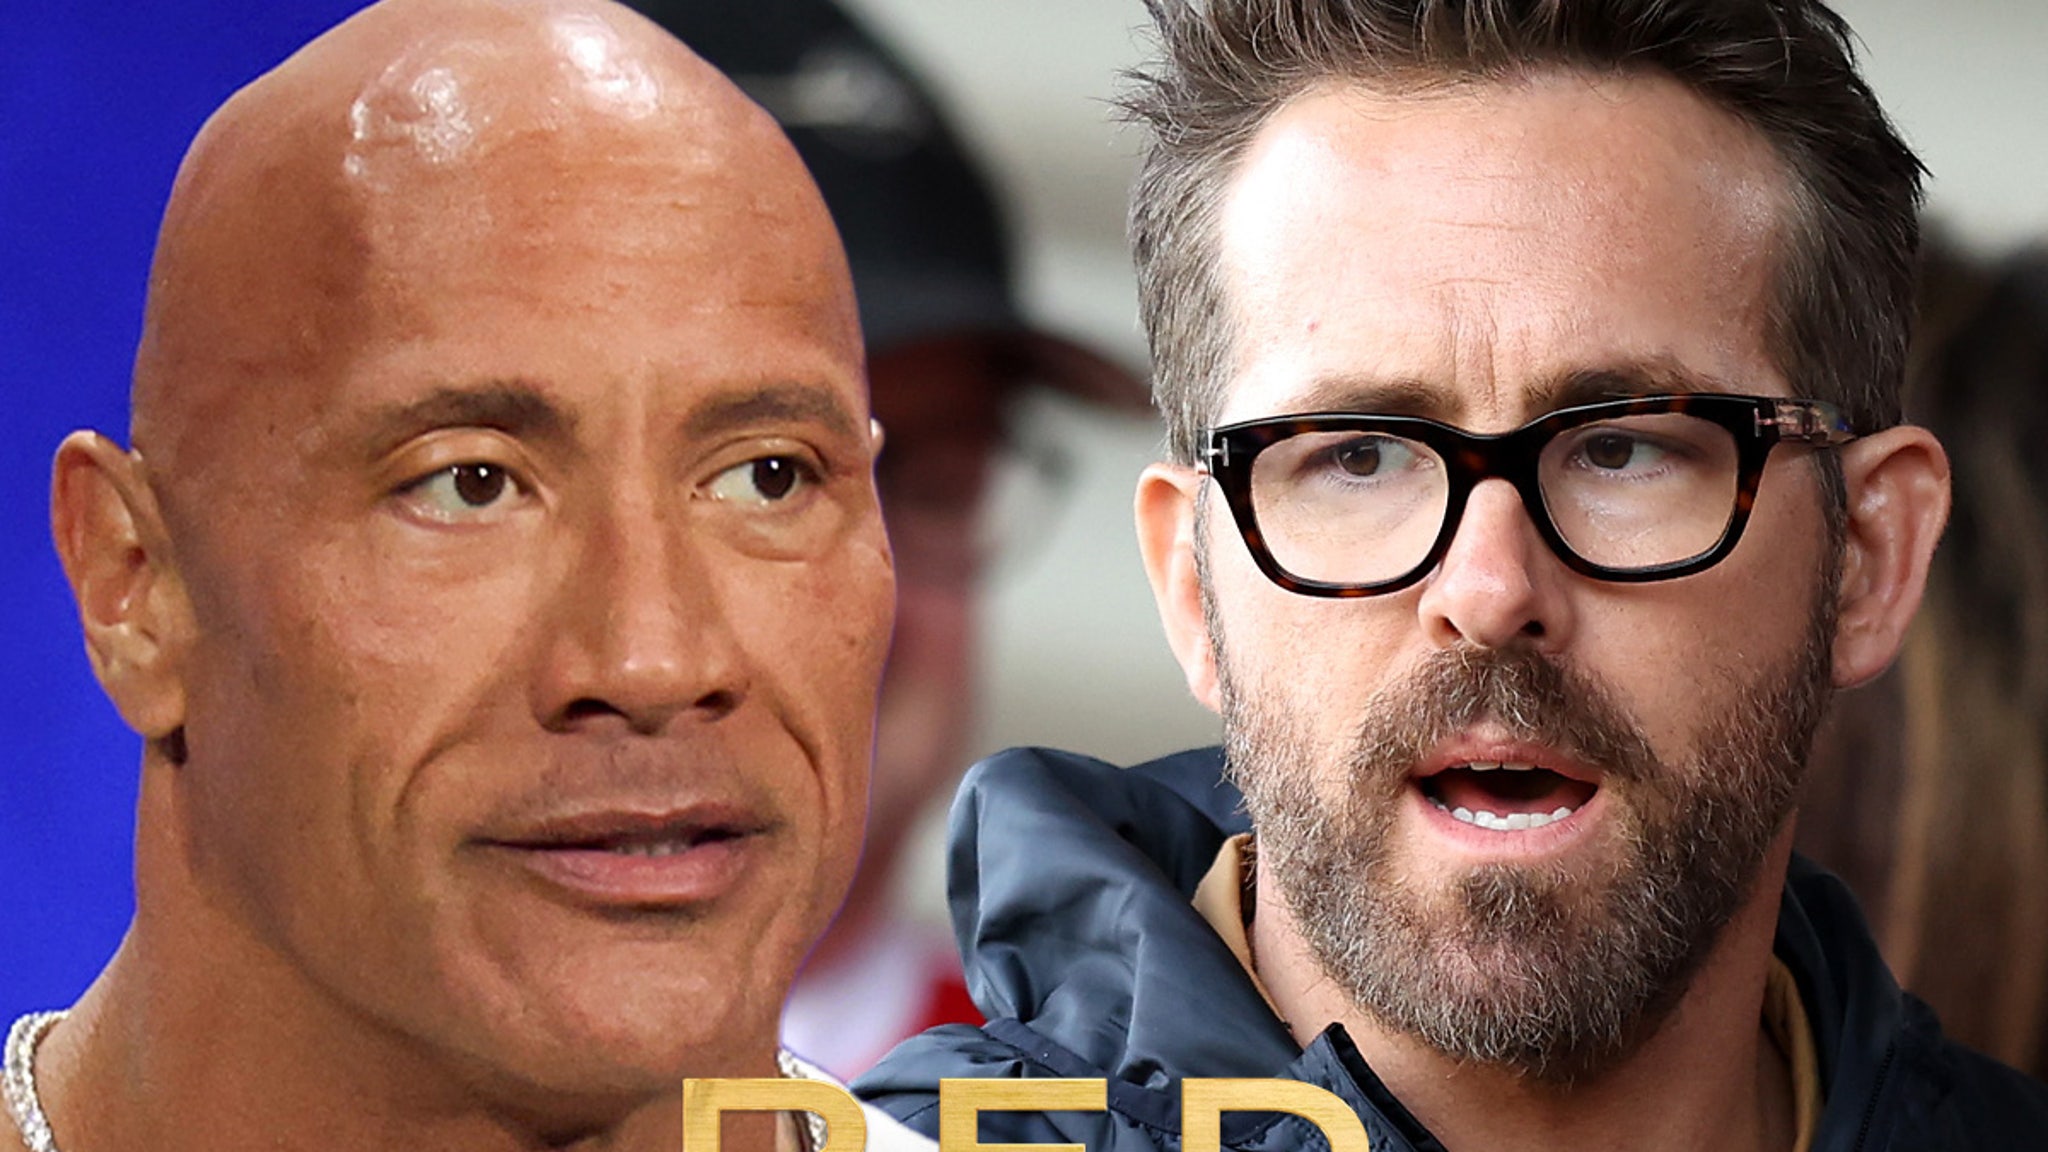 The Rock & Ryan Reynolds Butted Heads on 'Red Notice,' Issues Resolved